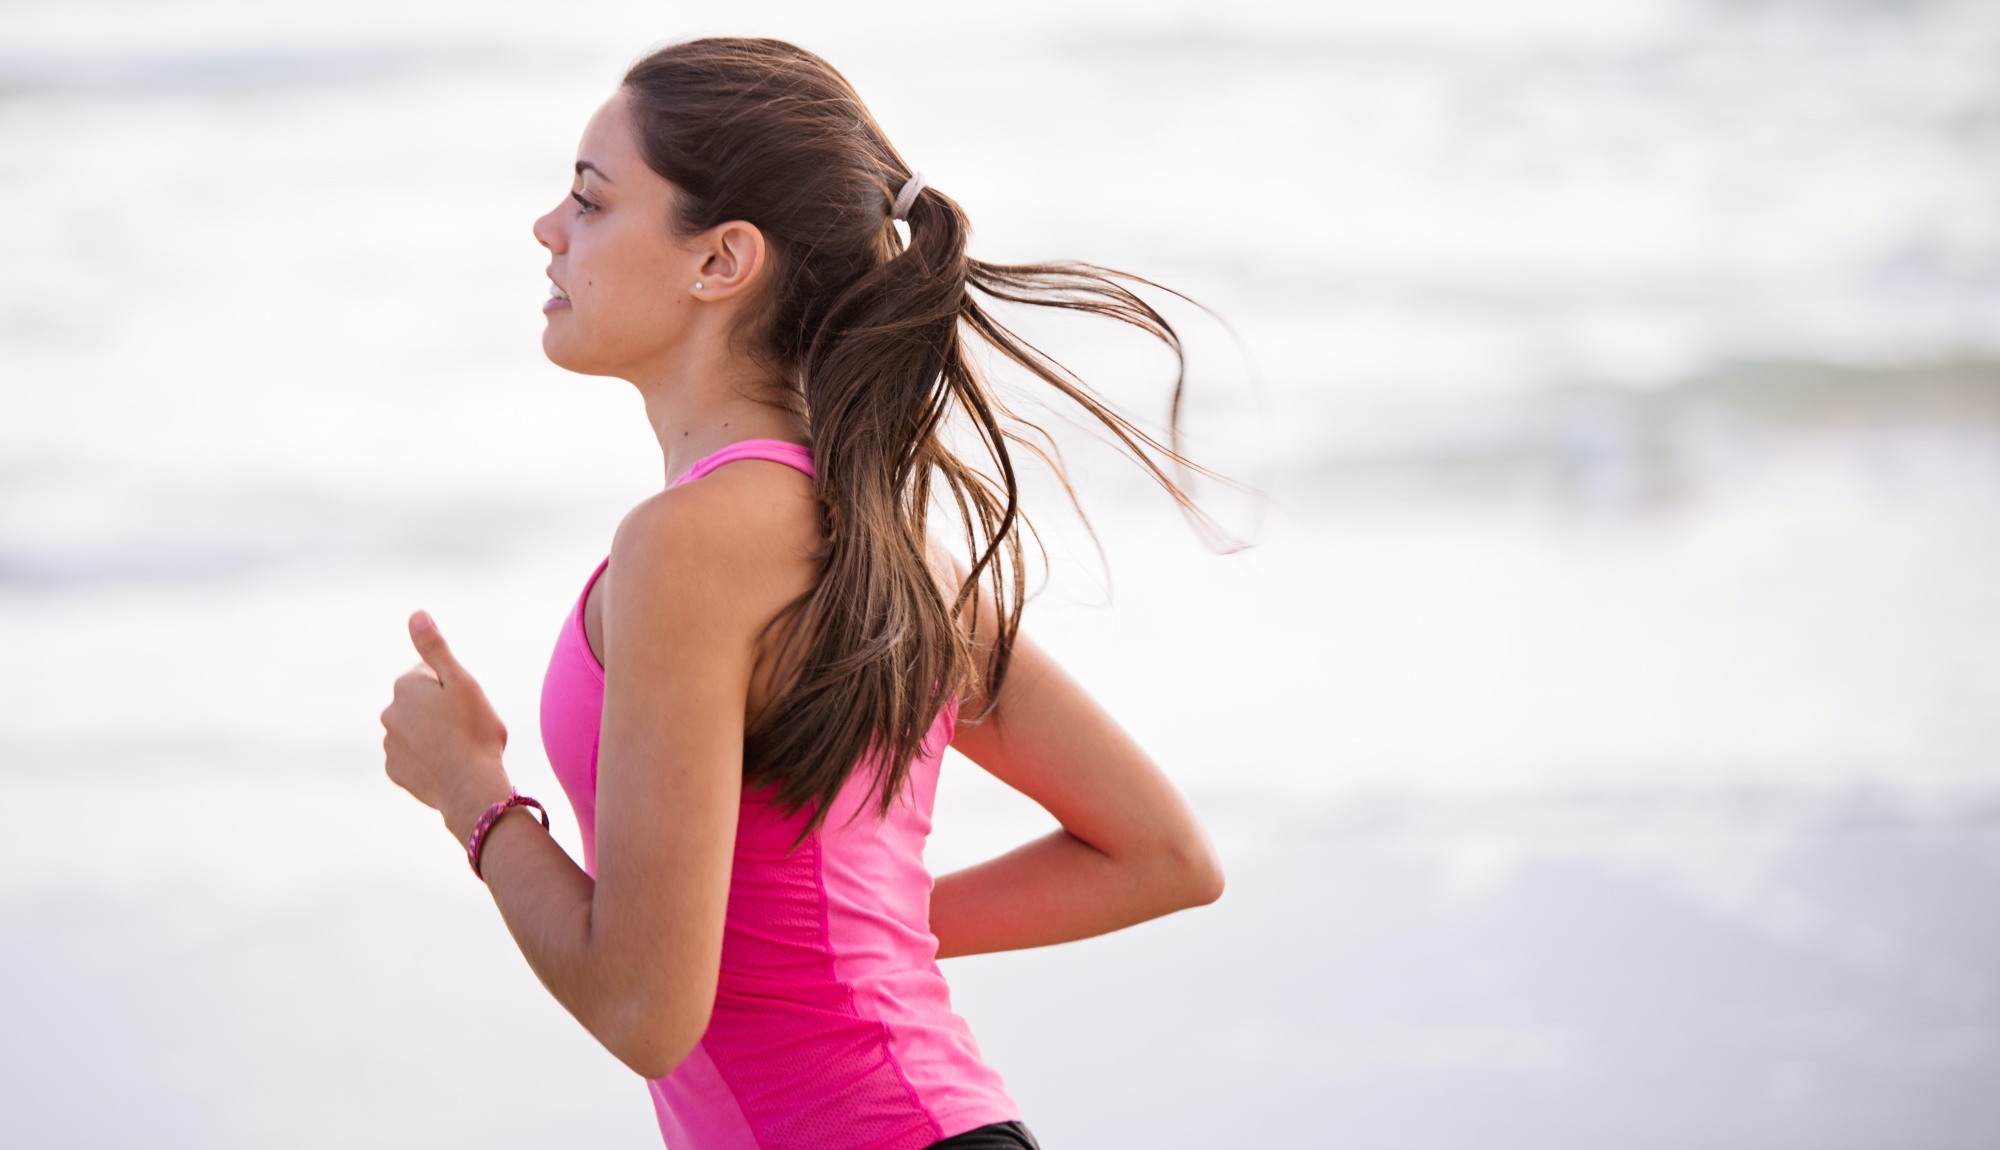 Woman running outdoors bodyweight exercise